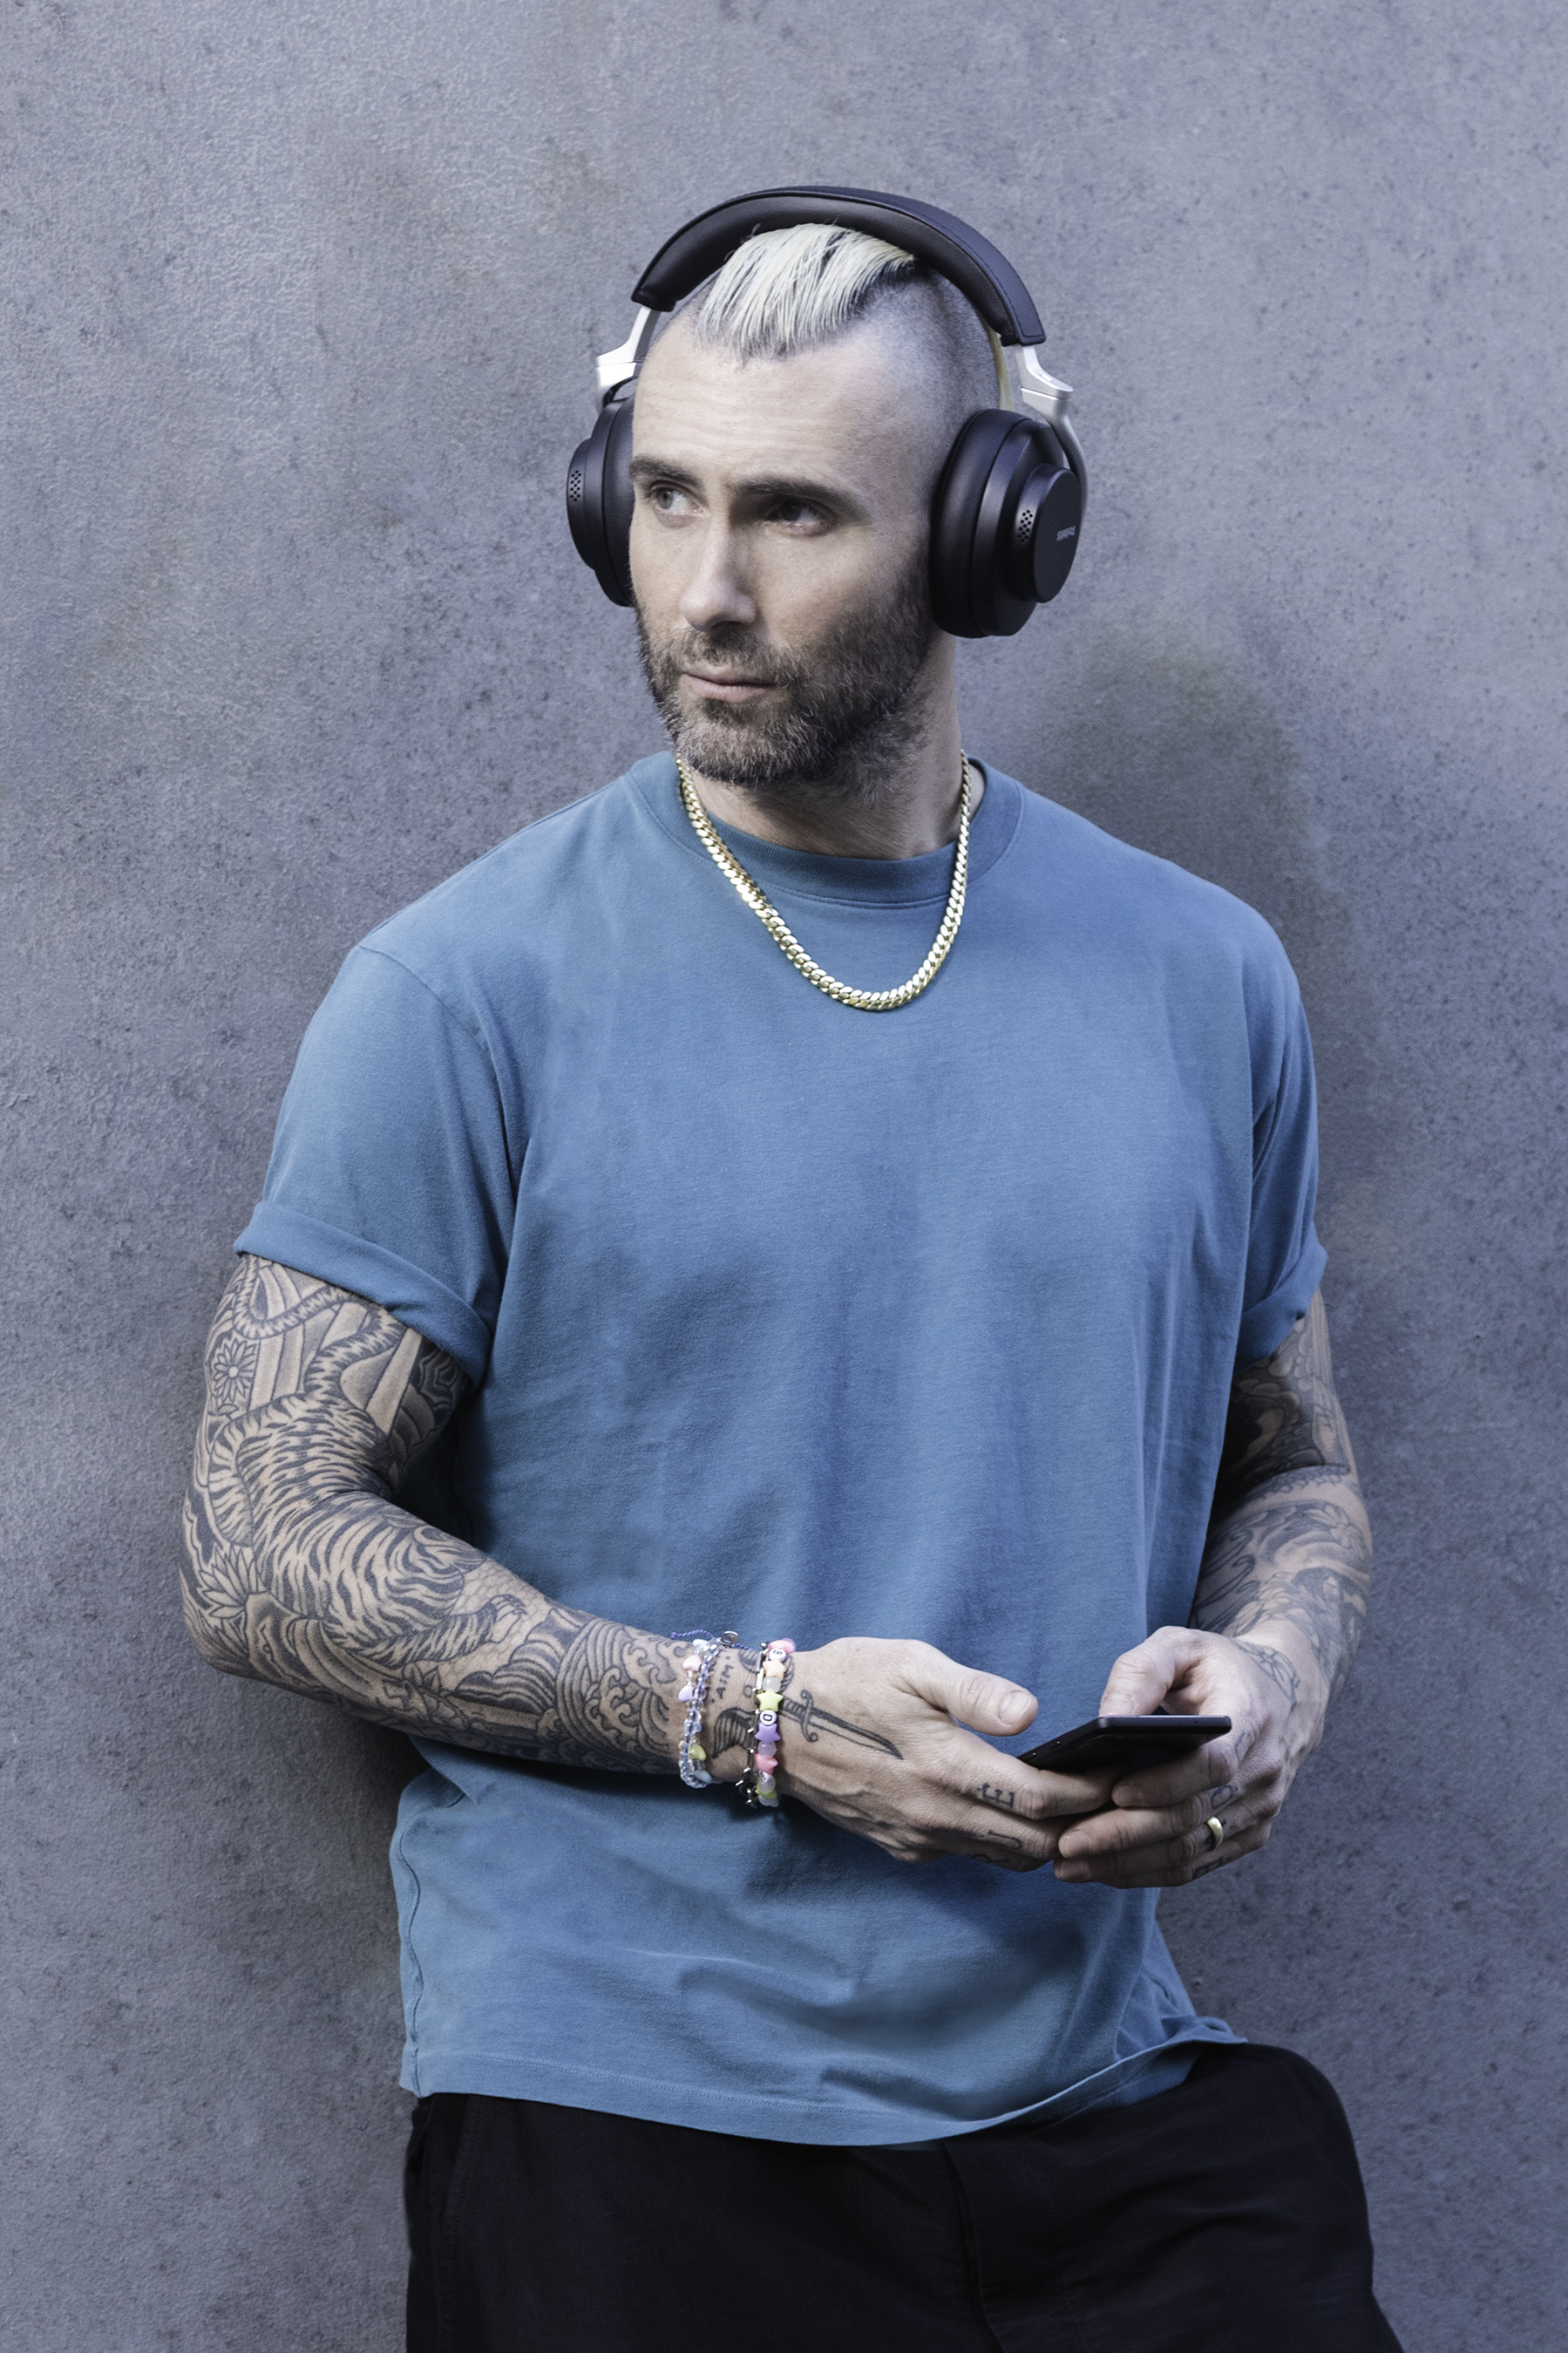 Shure AONIC 50 Wireless Noise Cancelling Headphones deliver premium, wireless studio-quality sound with exceptional comfort and durability